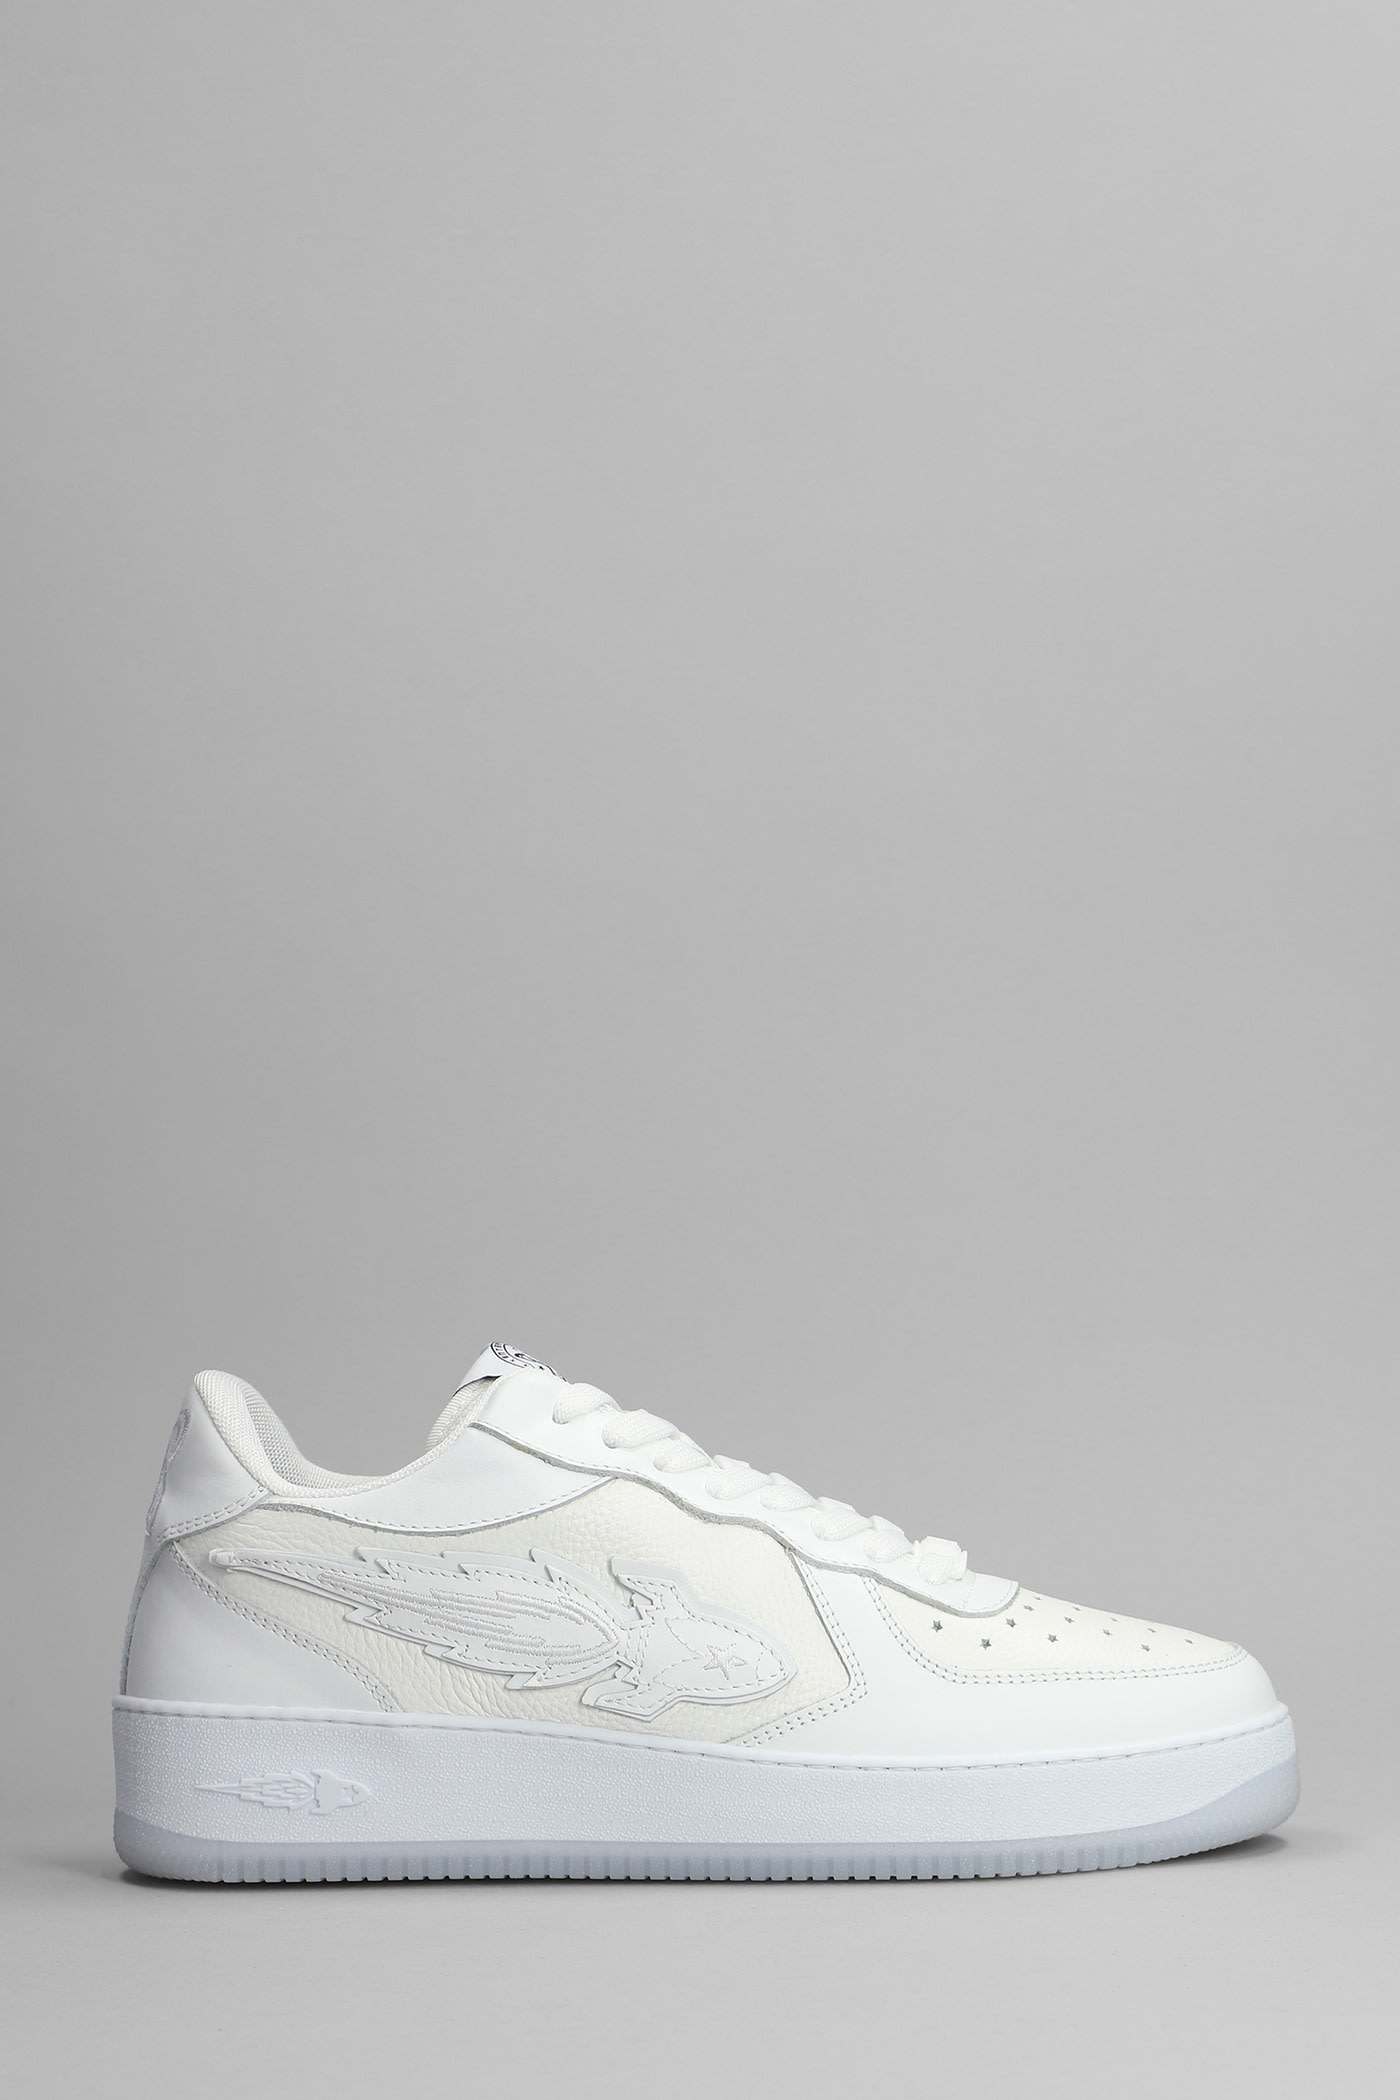 Enterprise Japan Sneakers In White Leather